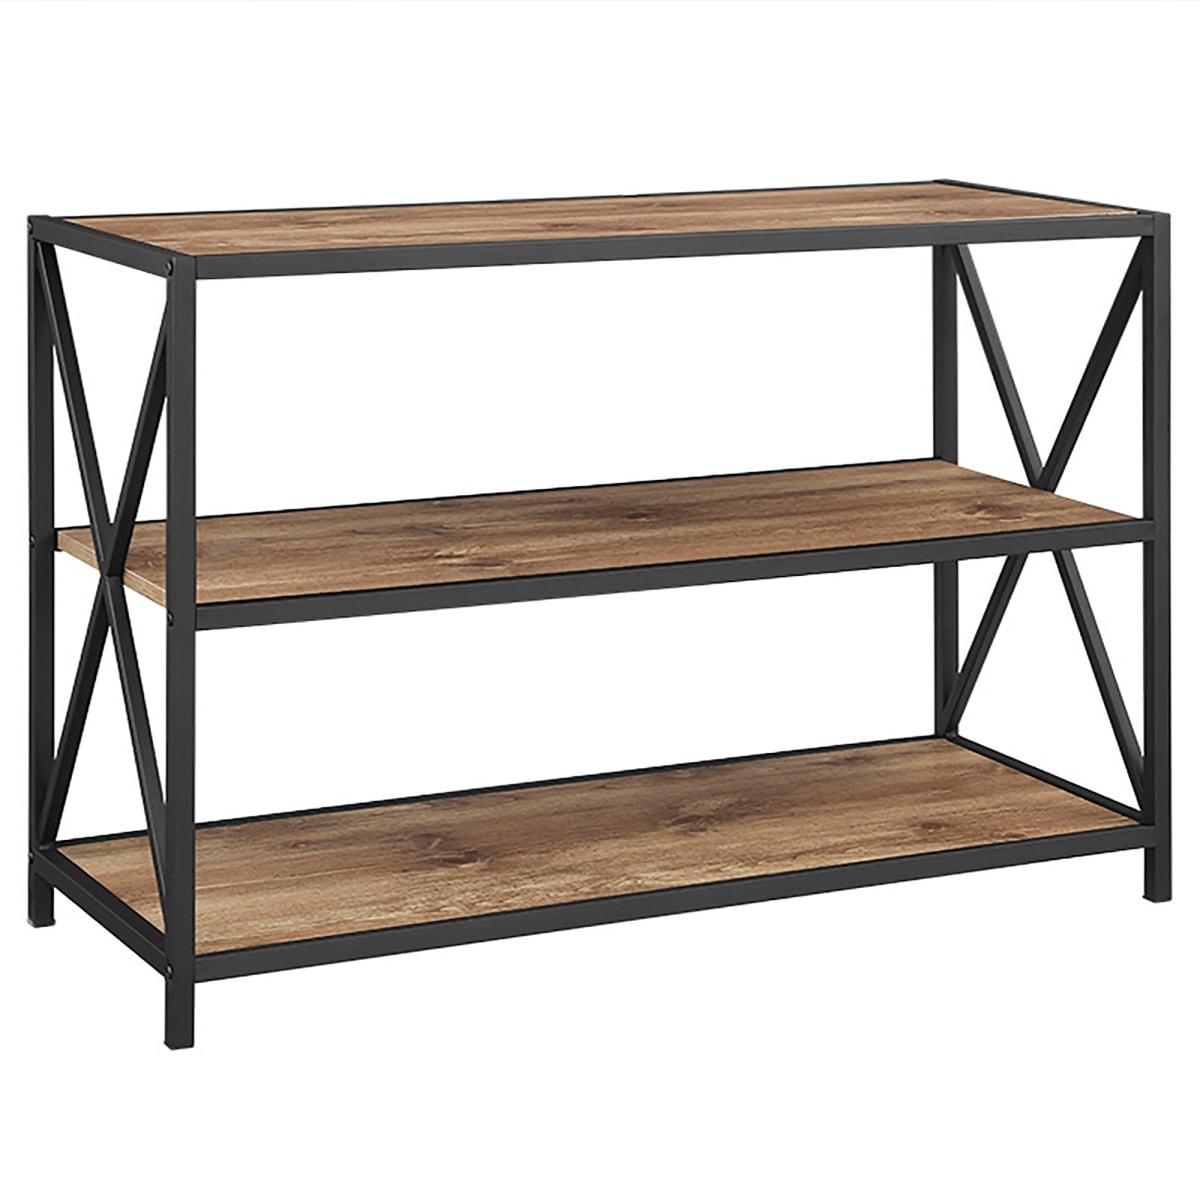 Delacora Bds40xmwbw X Frame 40 Wide, Rustic Industrial Shelving